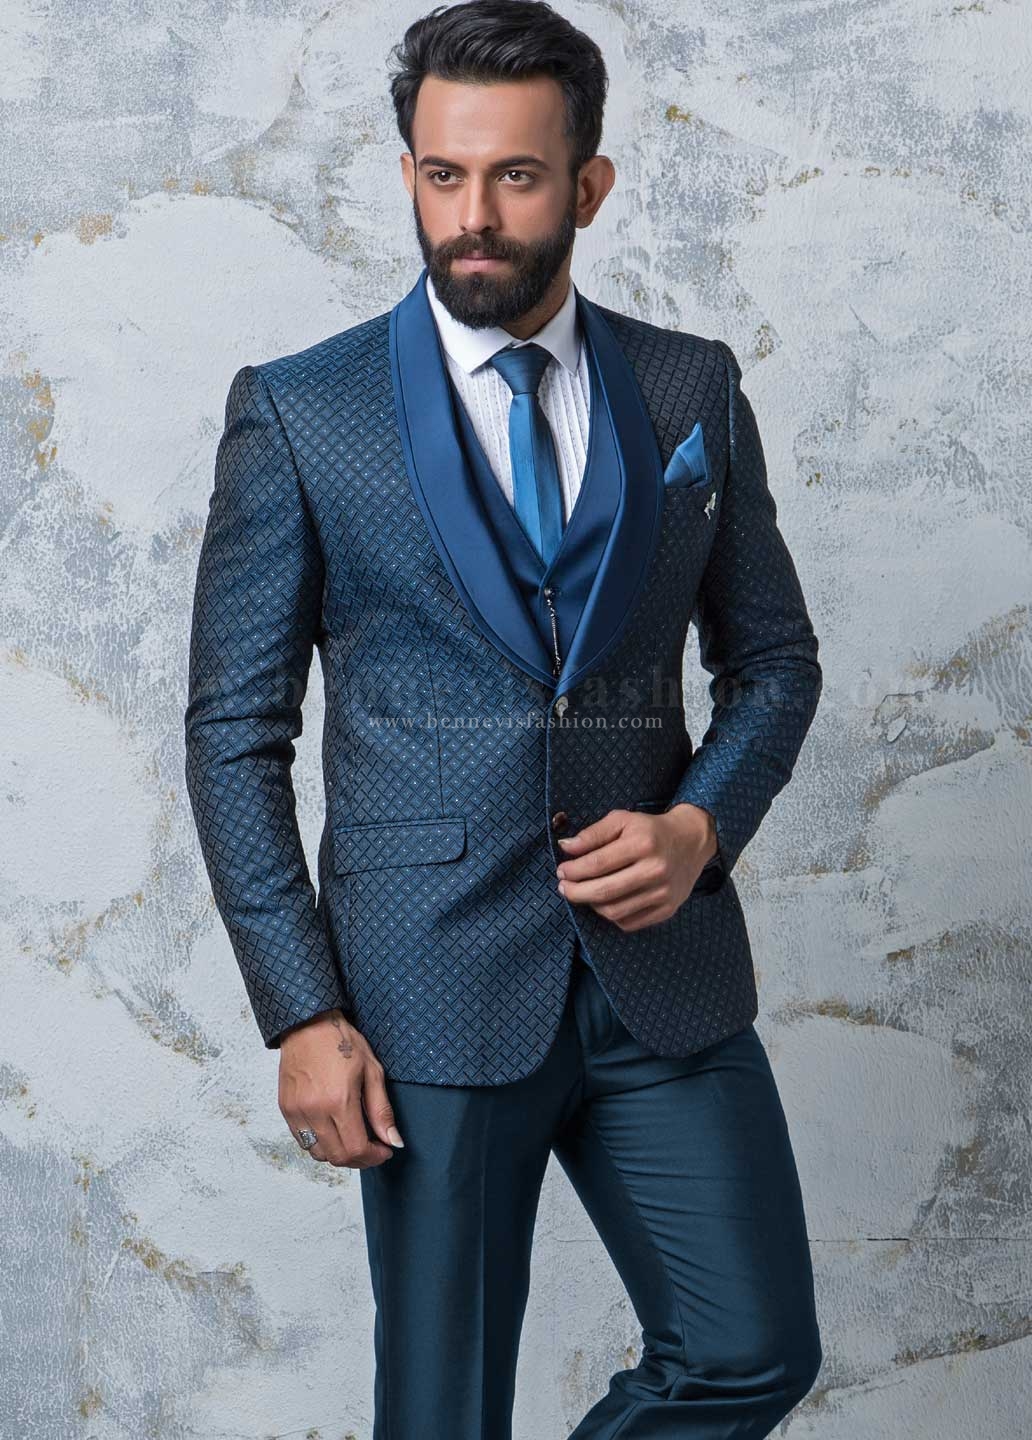 Summer Suits For Men - photos and vectors